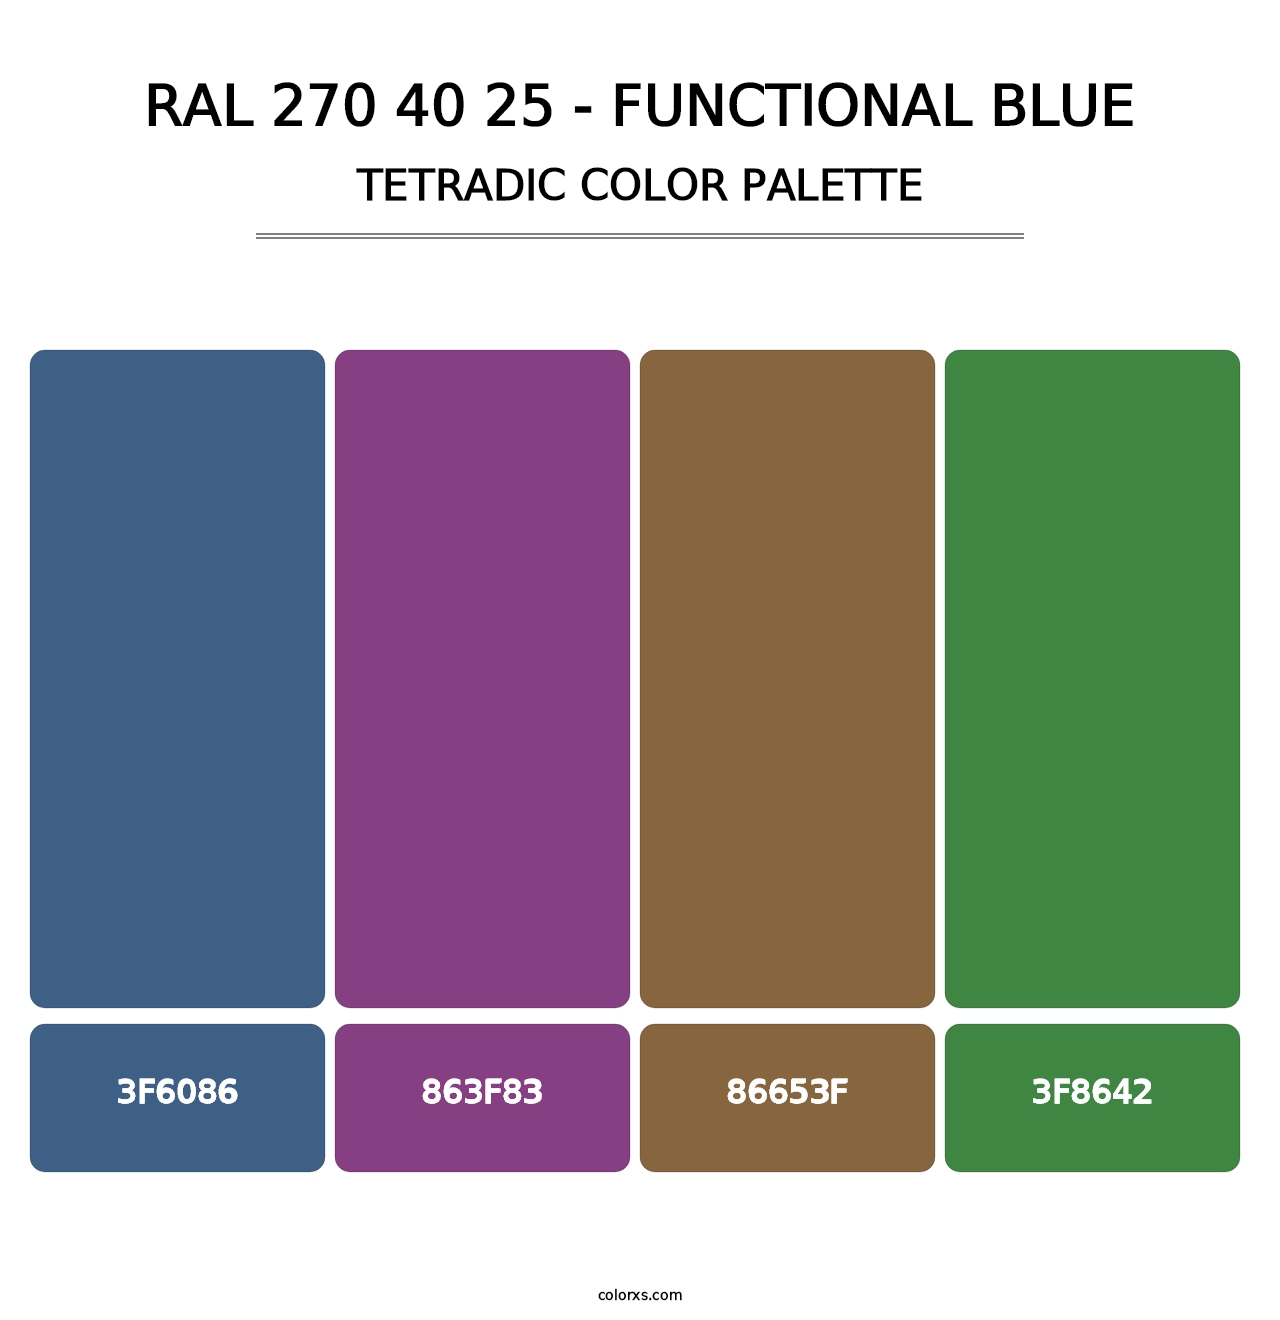 RAL 270 40 25 - Functional Blue - Tetradic Color Palette